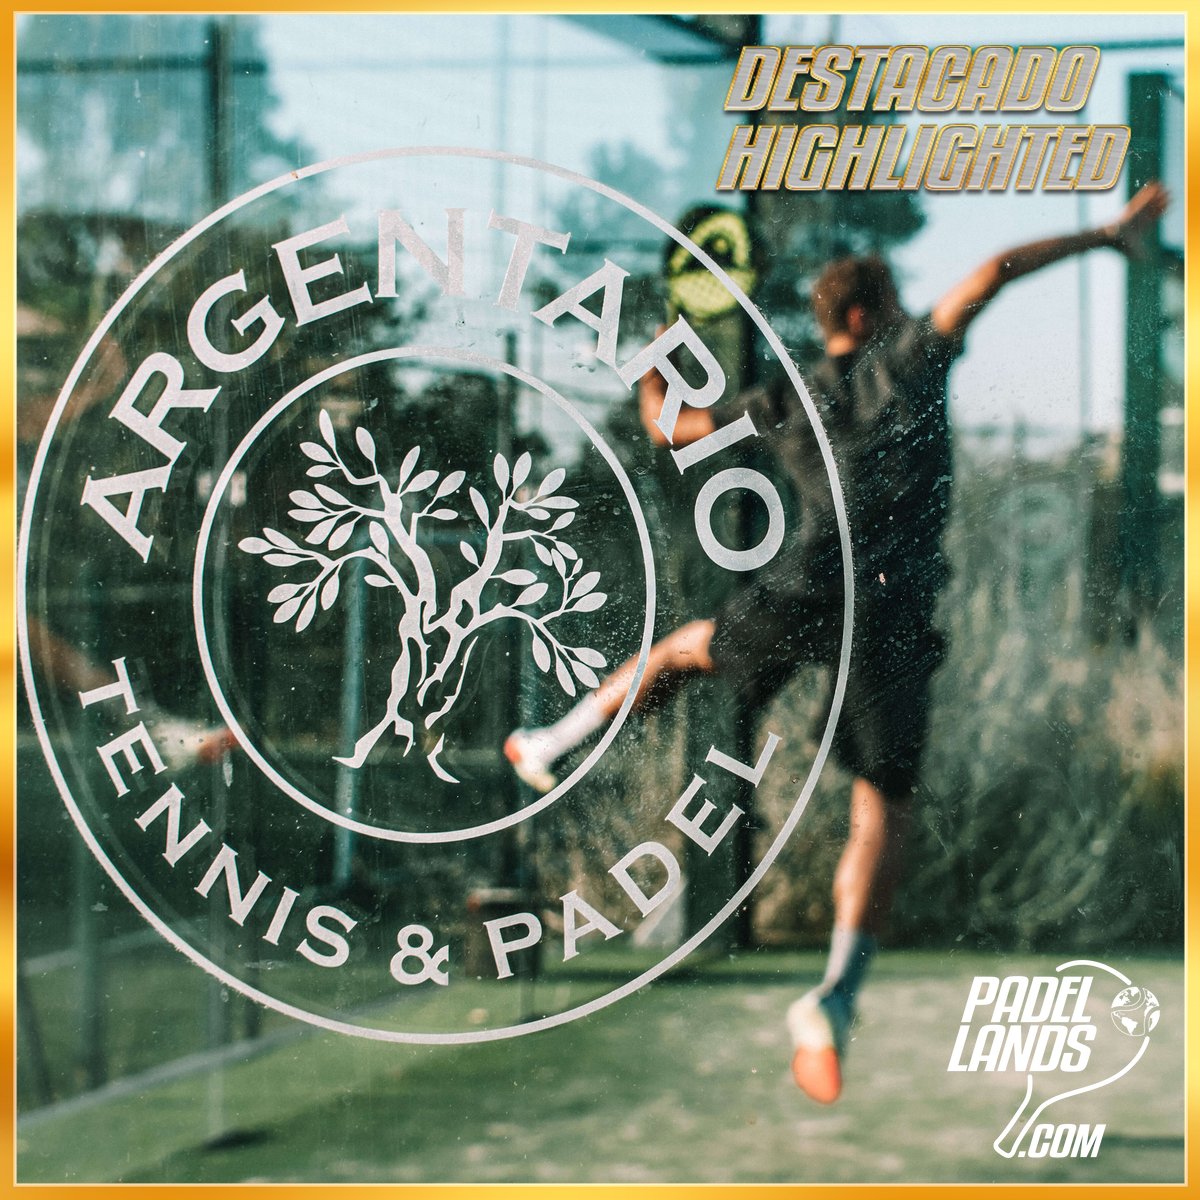 The padel courts at @ArgentarioGolf are an incentive to visit our favorite resort in Italy. We will continue to inform you in the coming months about its great attractions.
#PadelMania #PadelItaly #PadelResort #Resort  #Tuscany
📷 Cesare Ballarini.